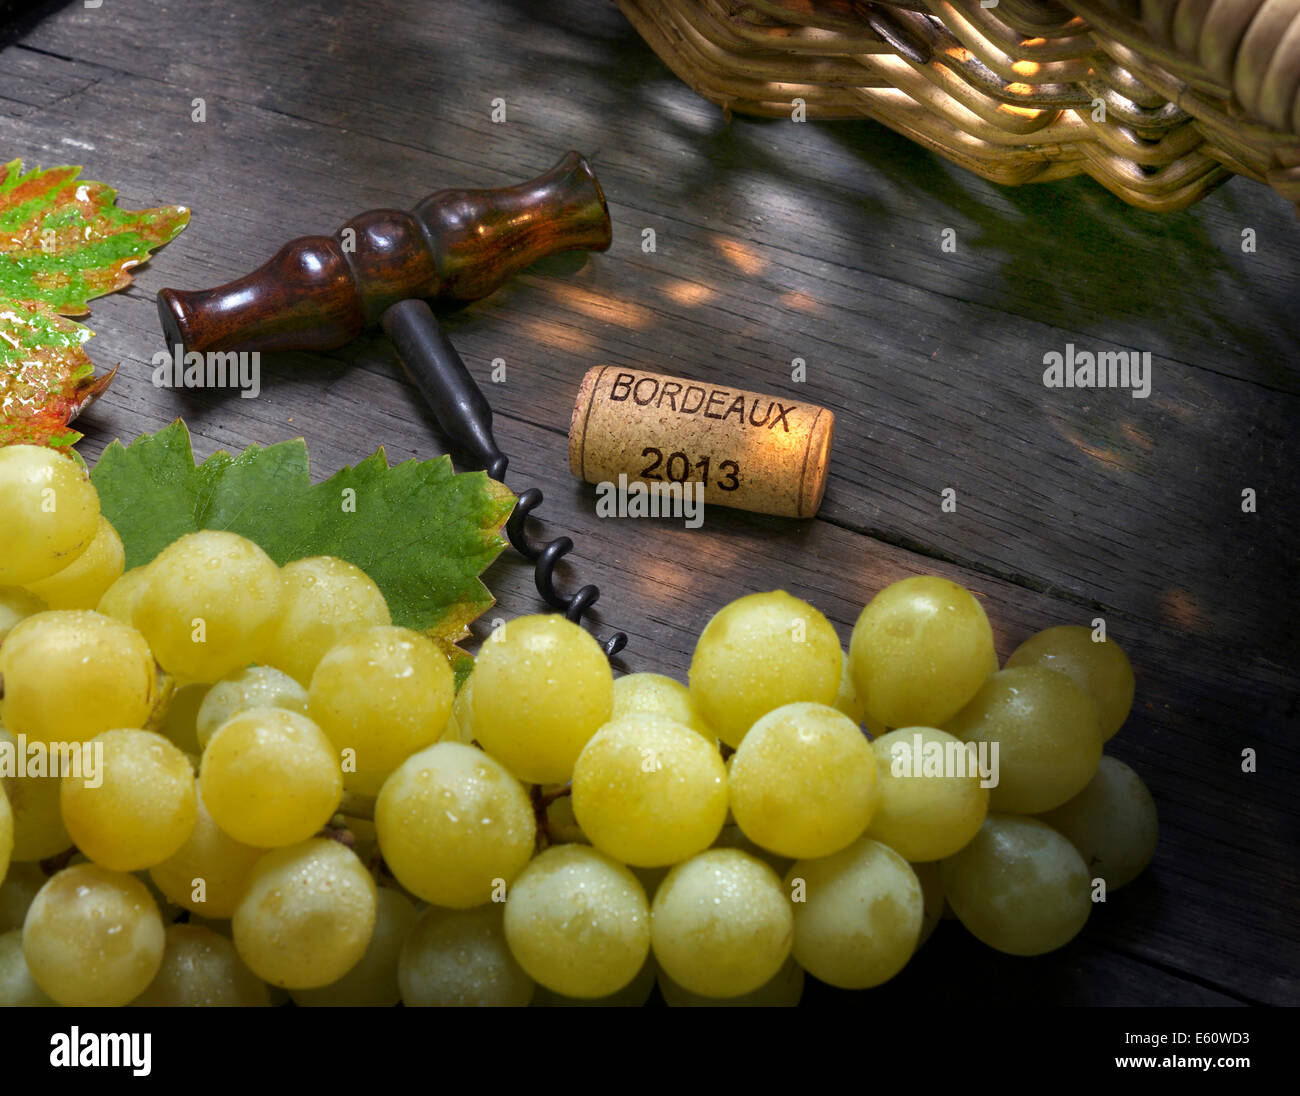 Conceptual Wine harvest cellar situation with grape pickers basket white grapes corkscrew and Bordeaux 2013 cork on wine barrel Stock Photo